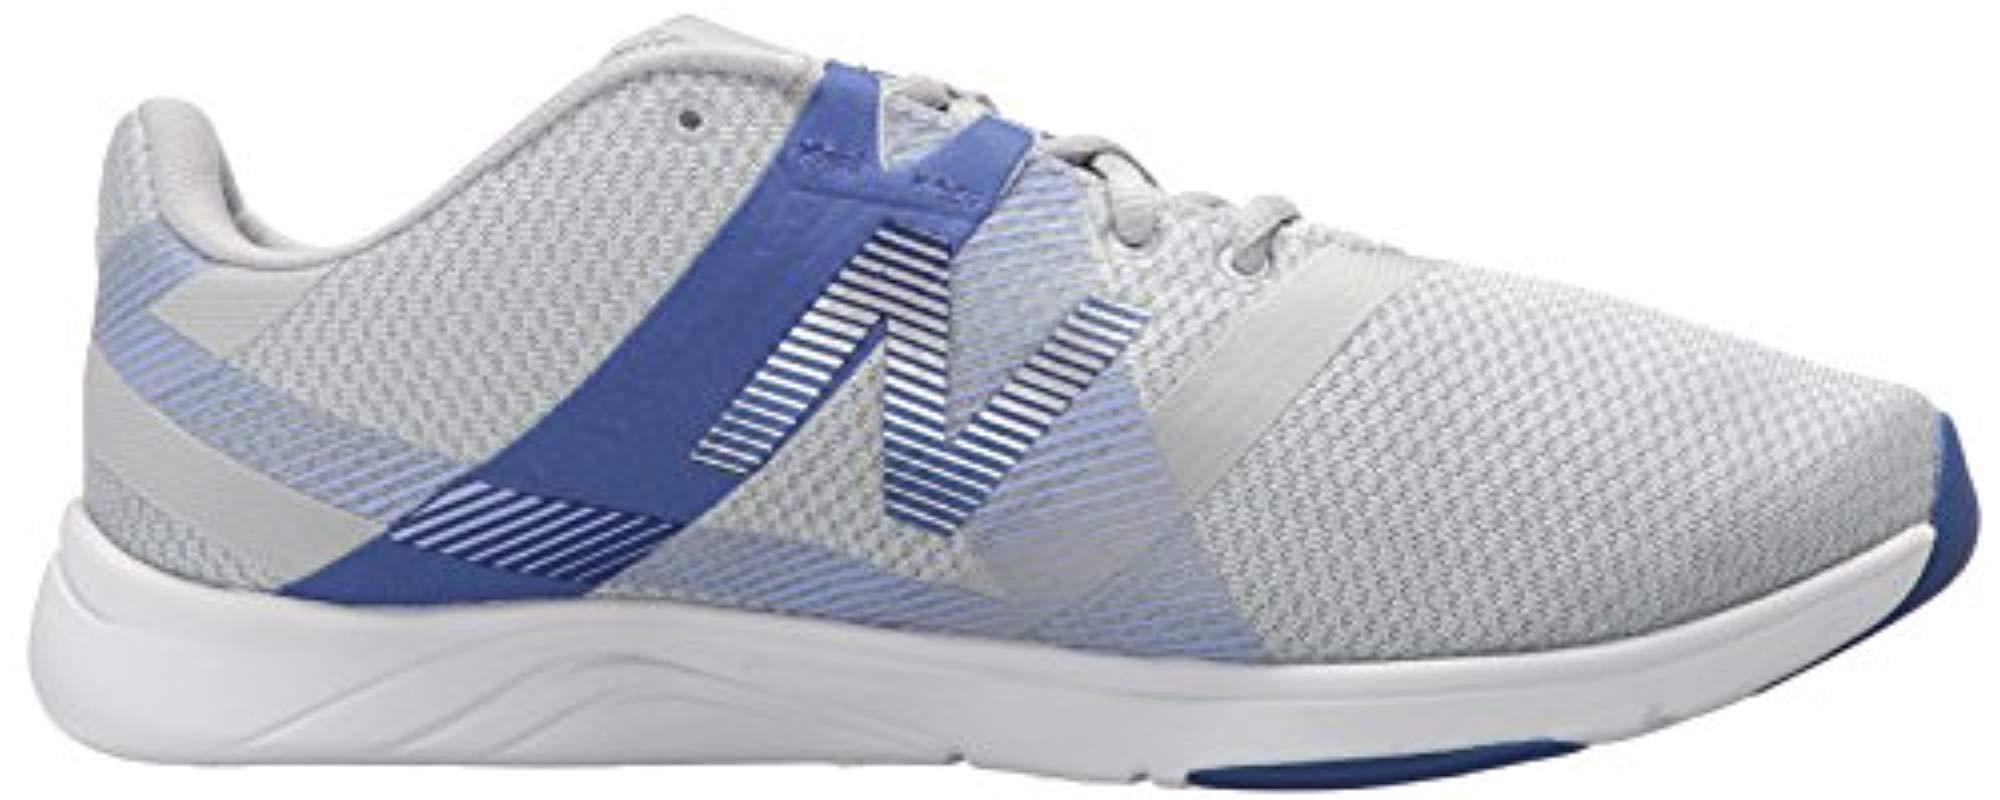 New Balance Synthetic 611v1 Cush + Cross Trainer, Grey, 6 D Us in Gray -  Save 72% - Lyst